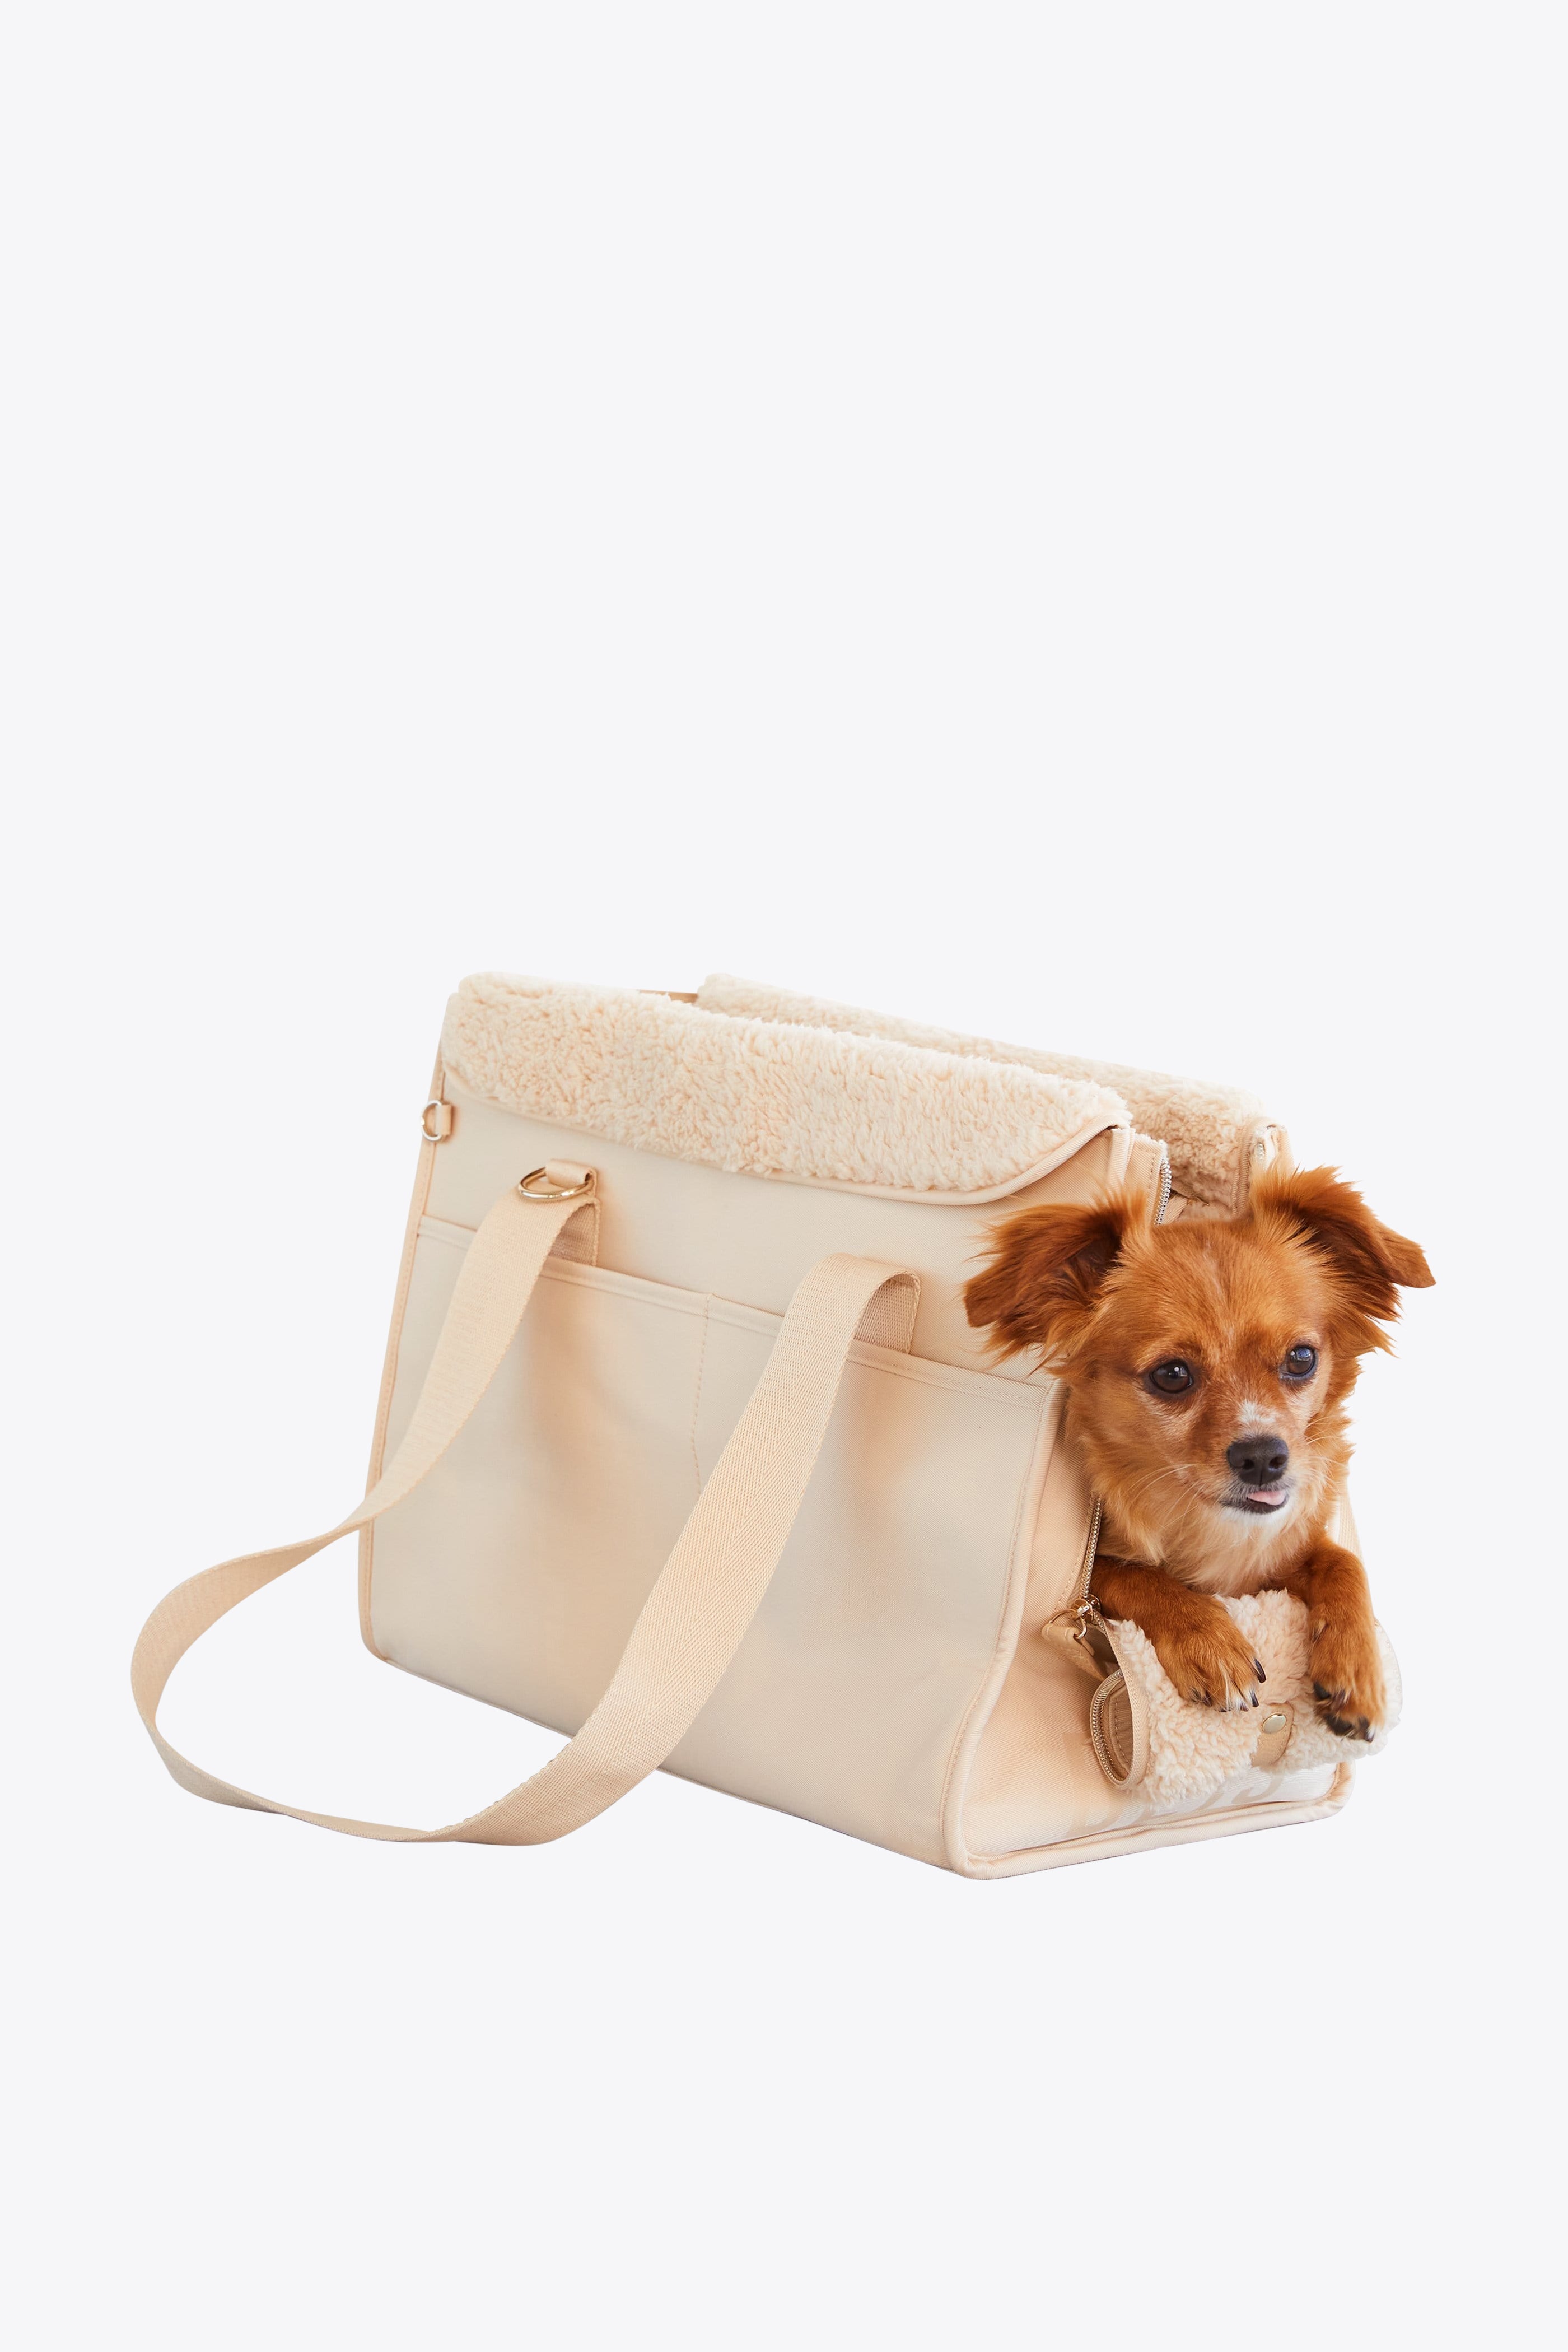 Chewy Vuitton Mini Designer Dog Toy Purse – FrankandBeanz Fancy Jewelry and  Toys for Pets